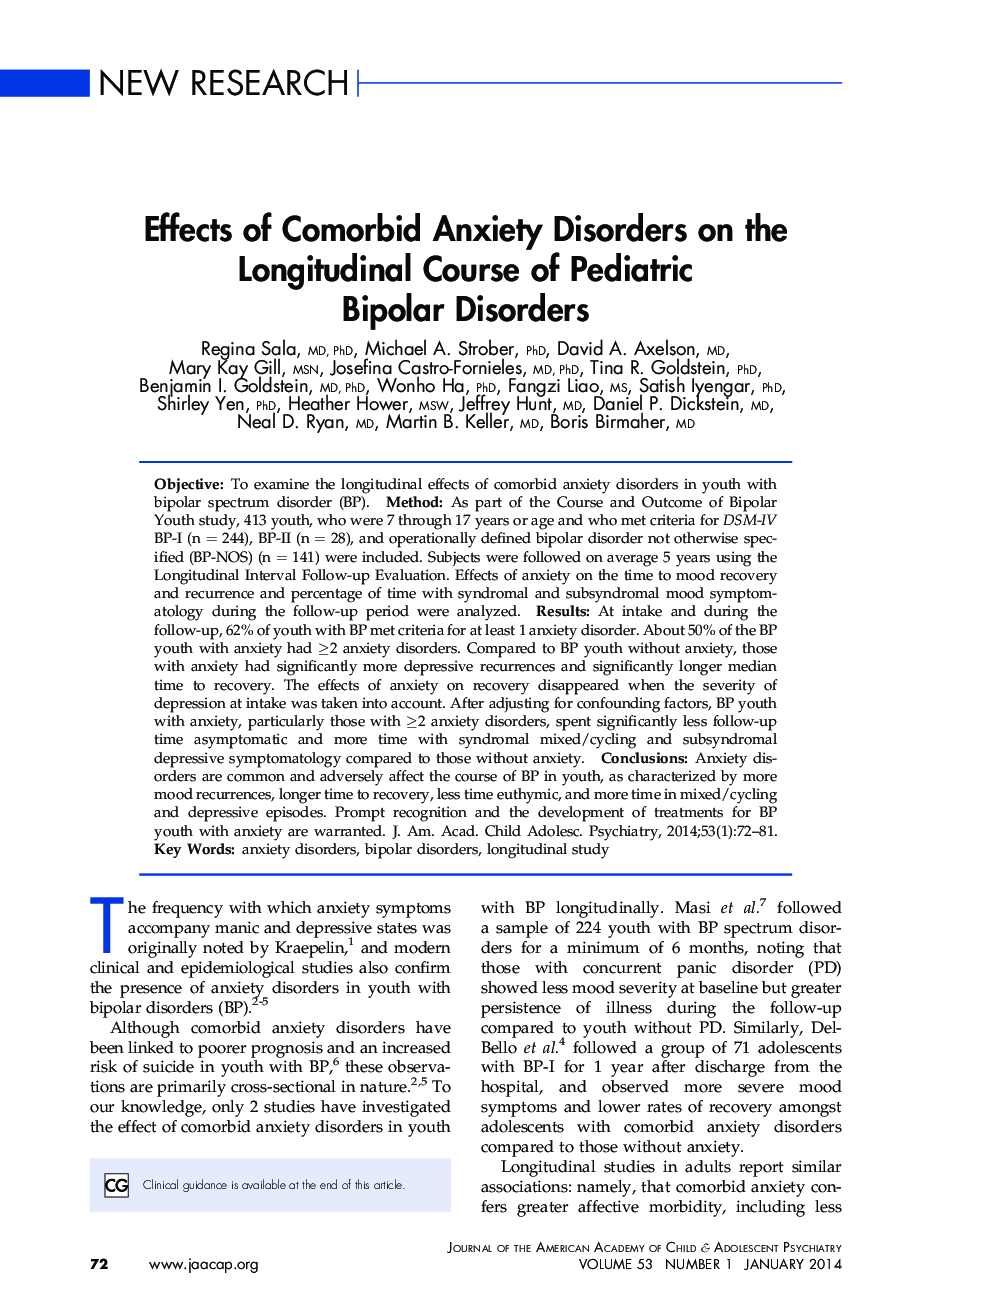 Effects of Comorbid Anxiety Disorders on the Longitudinal Course of Pediatric Bipolar Disorders 